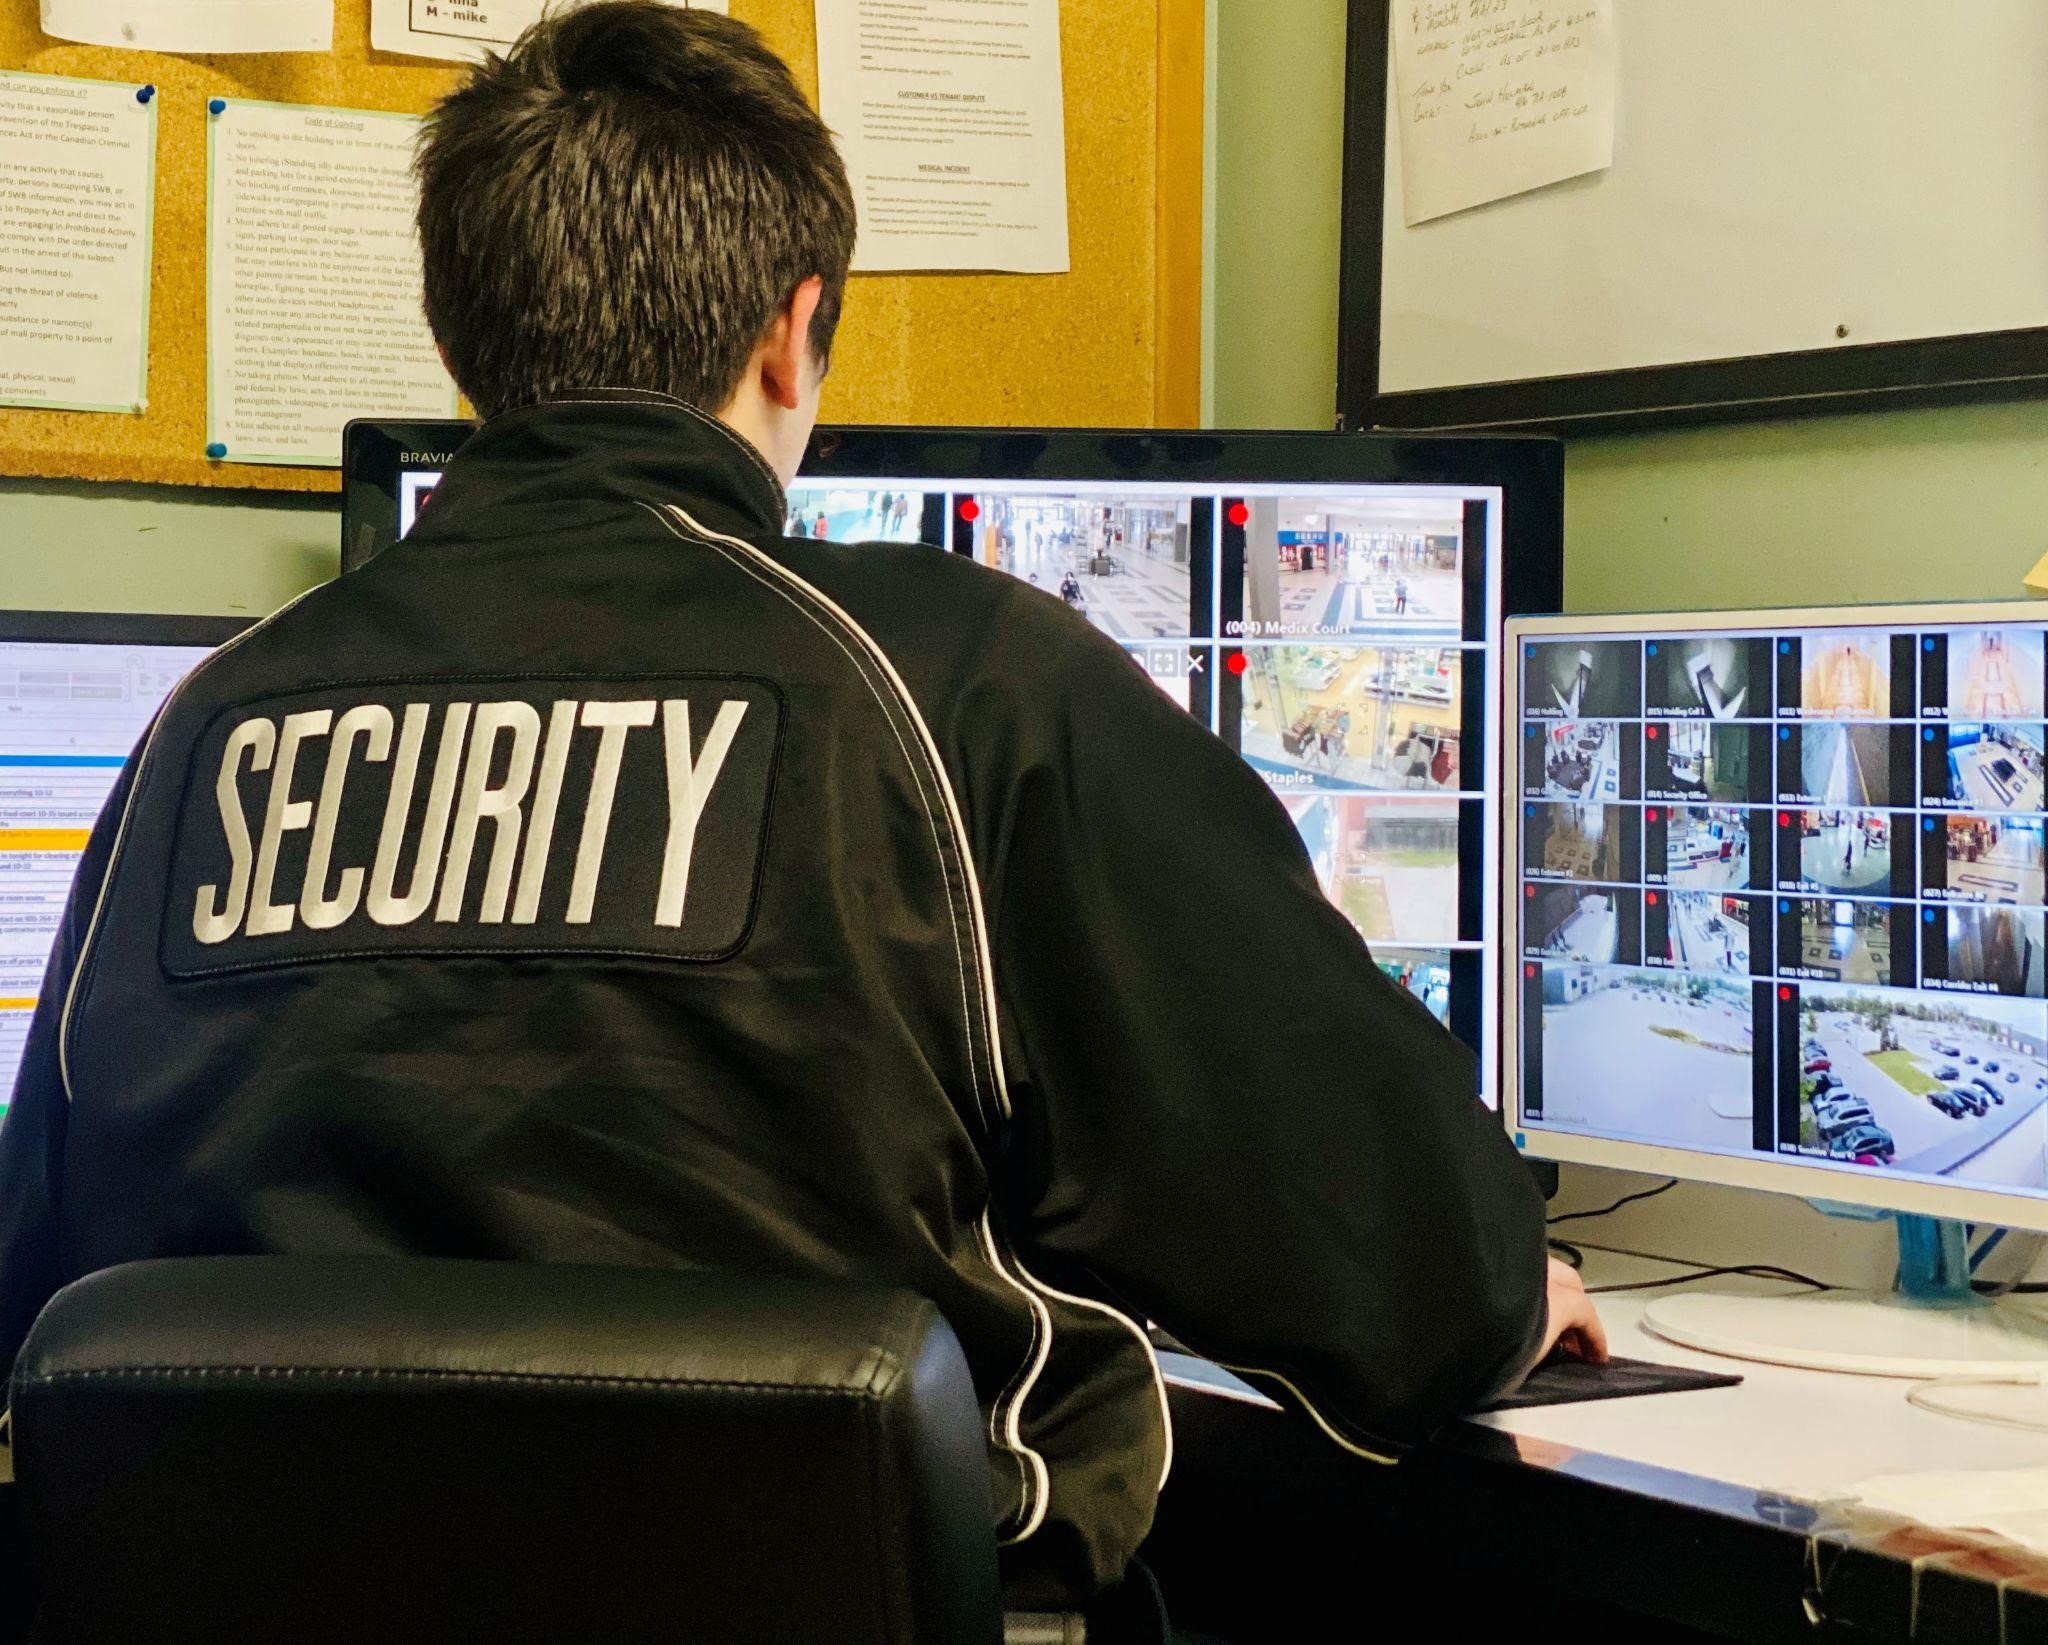 Security guard sitting in an office watching video surveillance footage on multiple computer monitors.